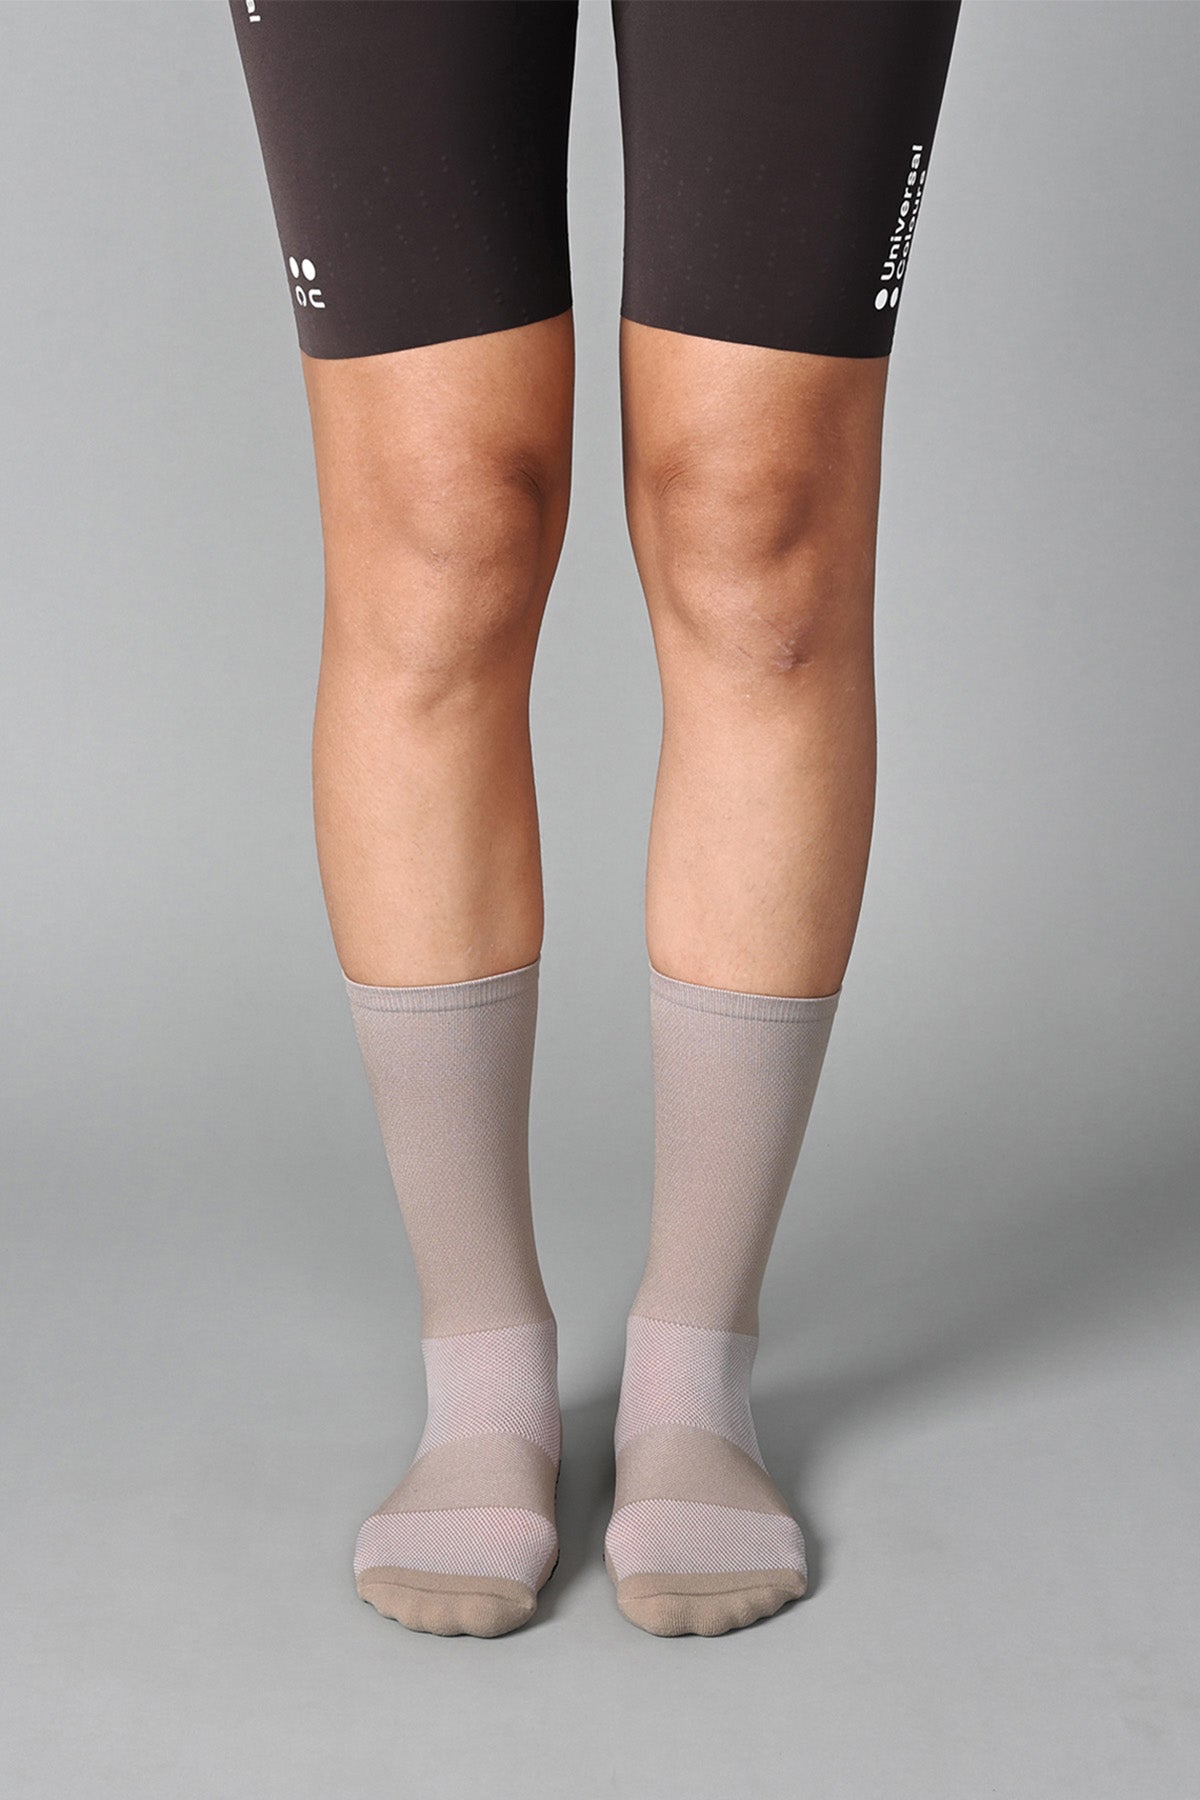 STEALTH - BEIGE FRONT | BEST CYCLING SOCKS